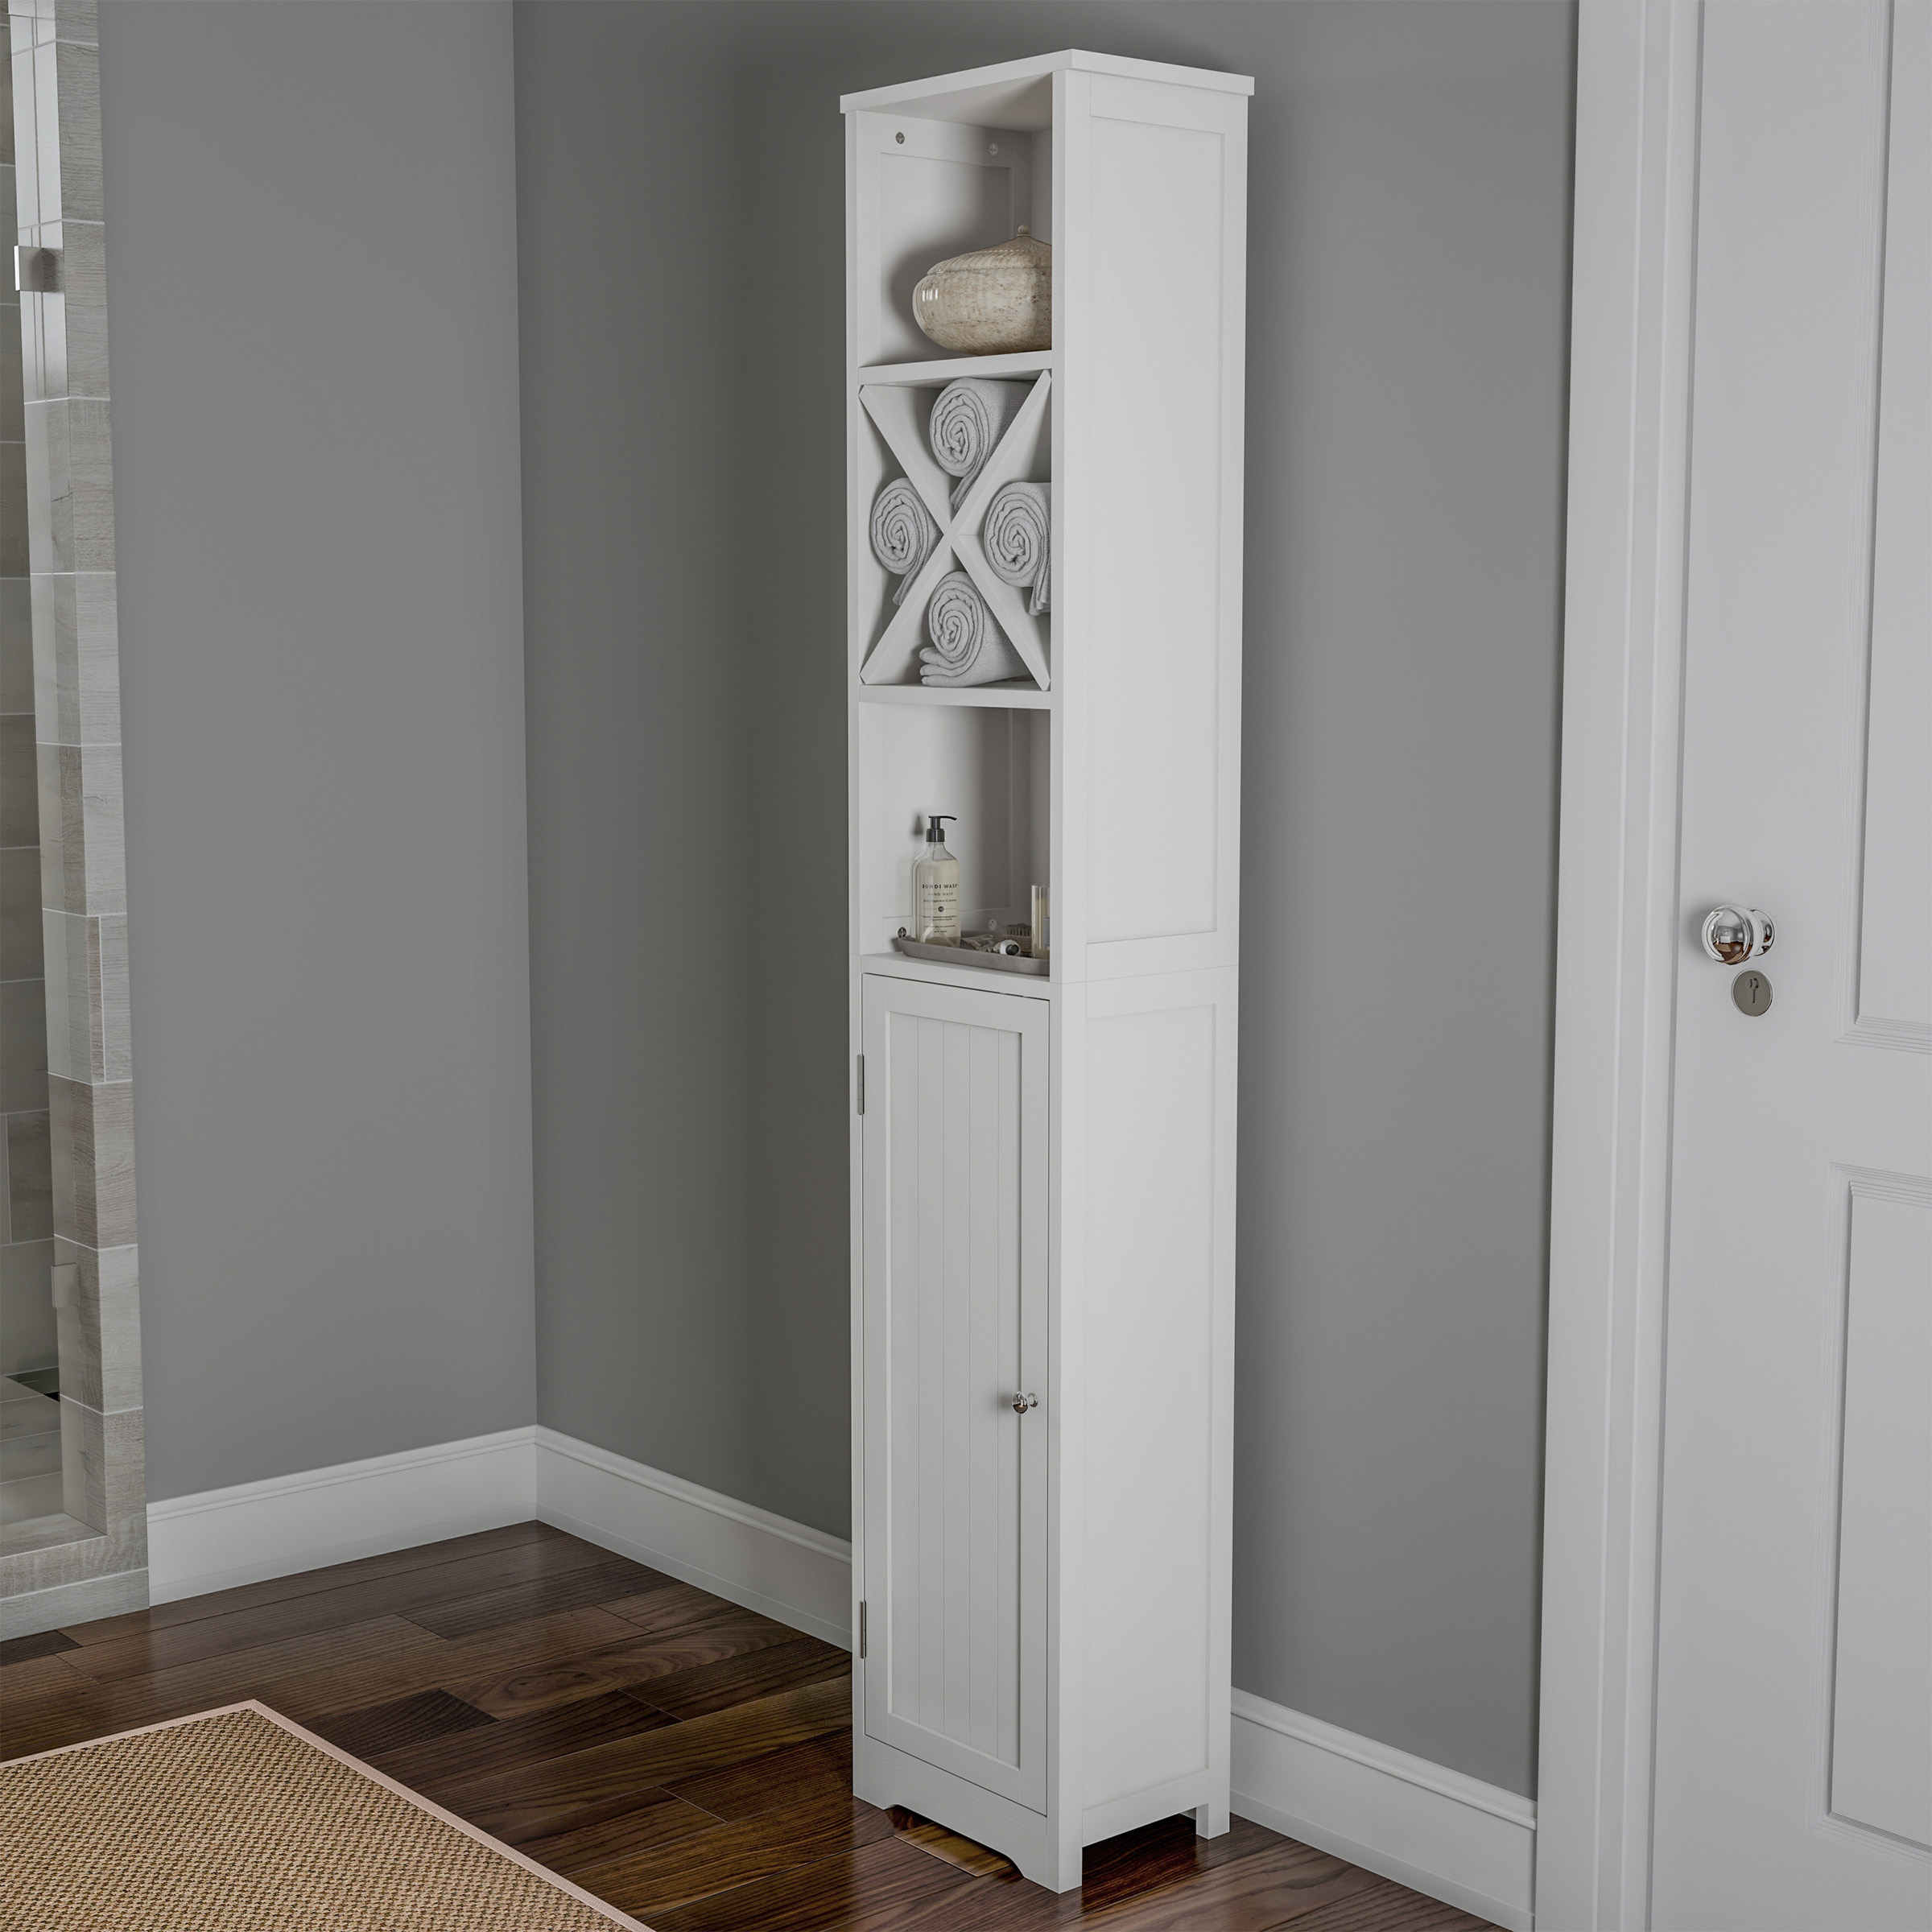 Linen Tower- 67 In. Tall Bathroom Or Laundry Room Storage Cabinet With Cubbyhole Divider For Towels-Adjustable Shelves & Cupboard